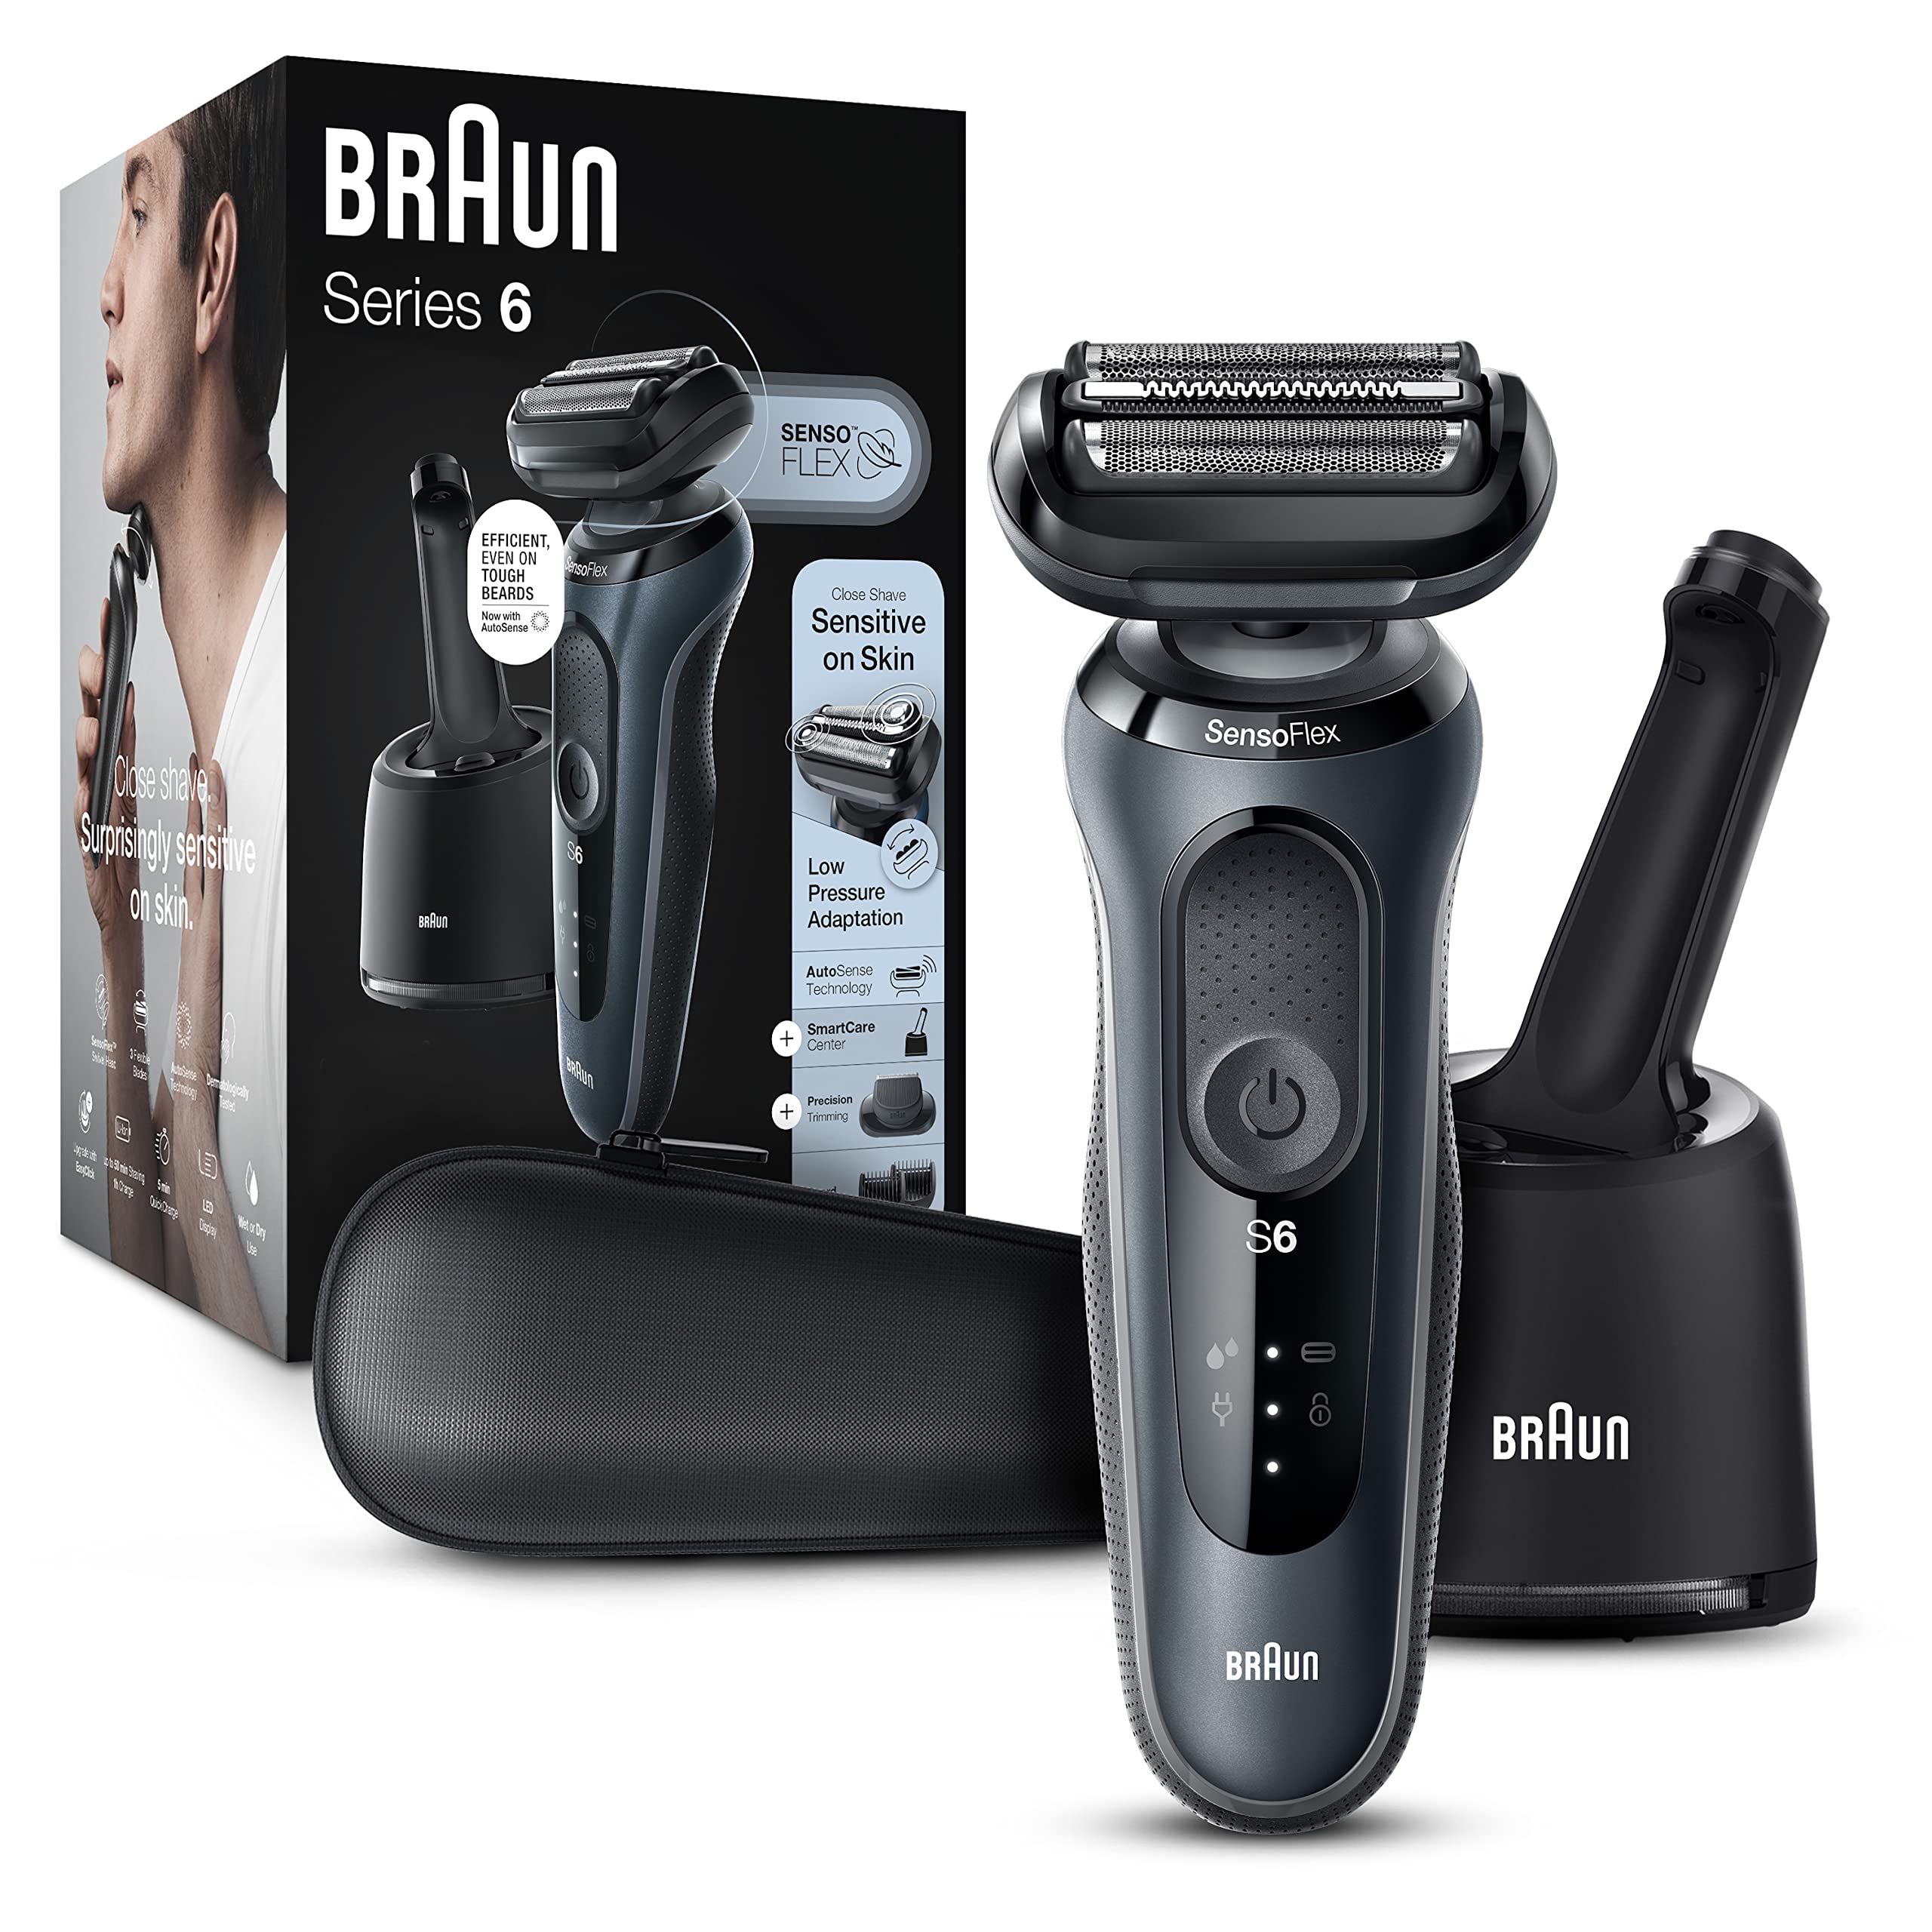 Braun Electric Razor for Men, Waterproof Foil Shaver, Series 6 6075cc, Wet  & Dry Shave, With Beard Trimmer for Grooming, Clean & Charge SmartCare  Center and Leather Travel Case ,Rechargeable, Black